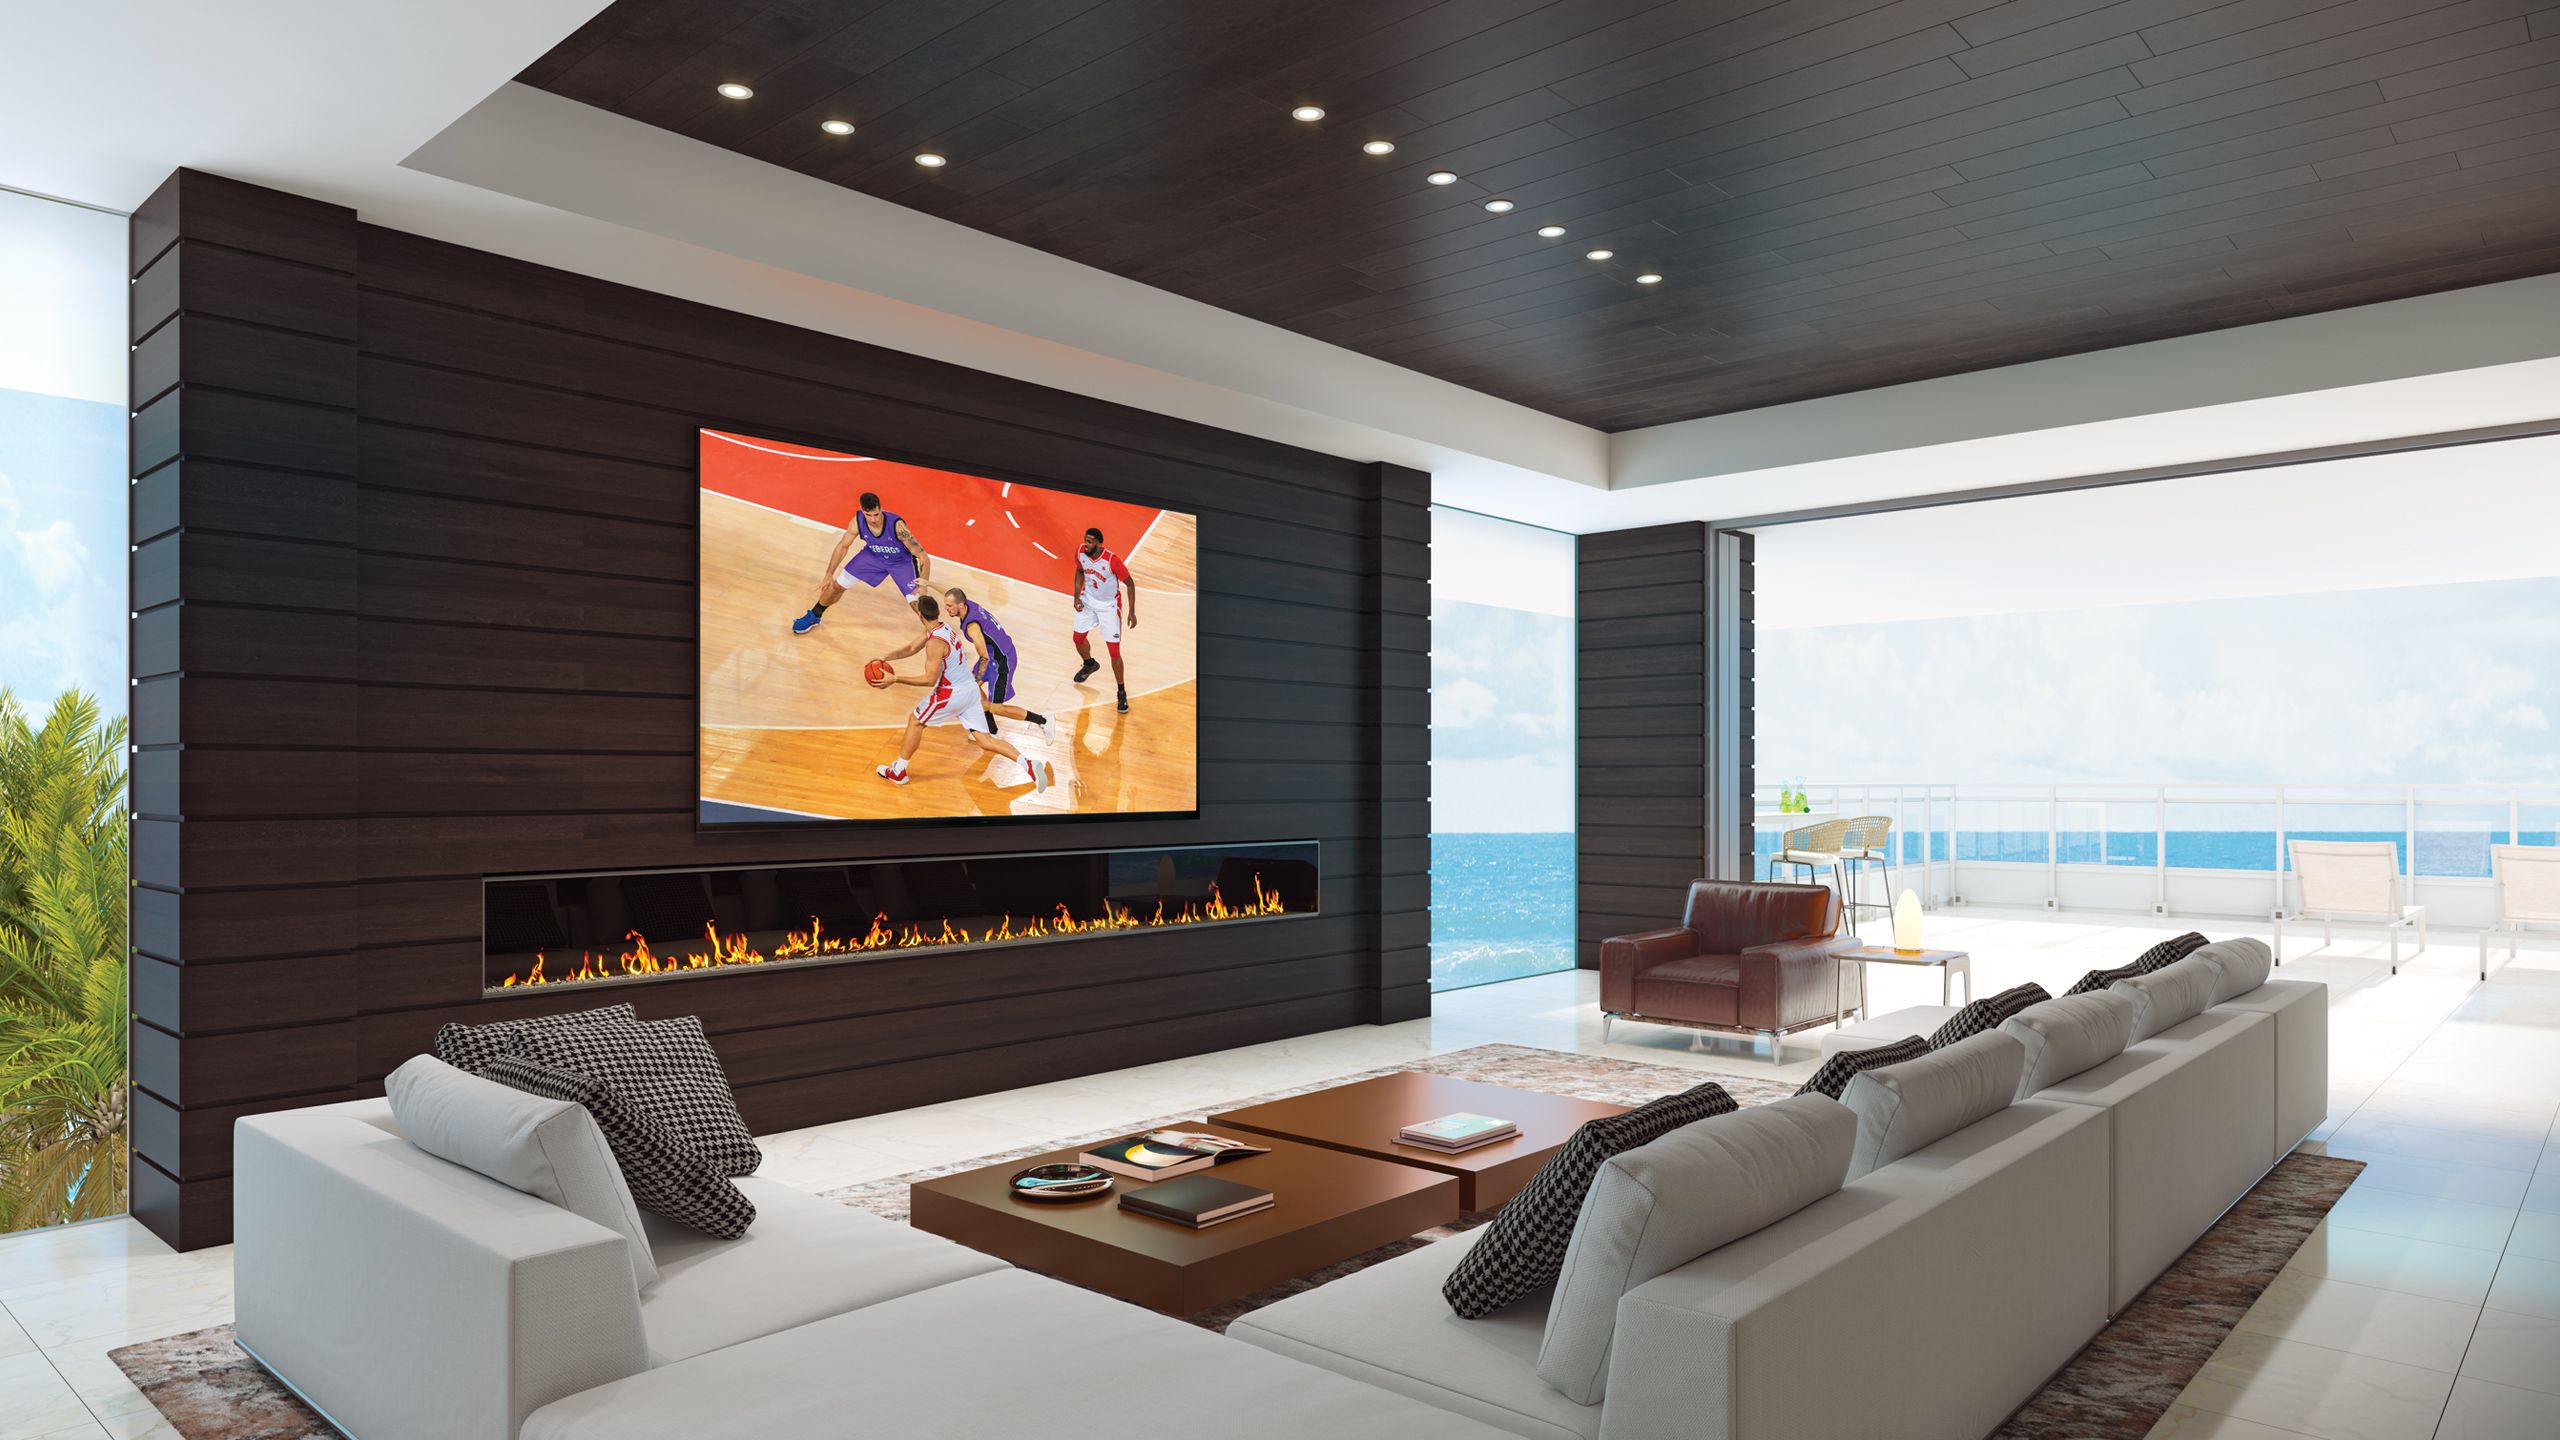 Sony image of basketball game on screen in modern home